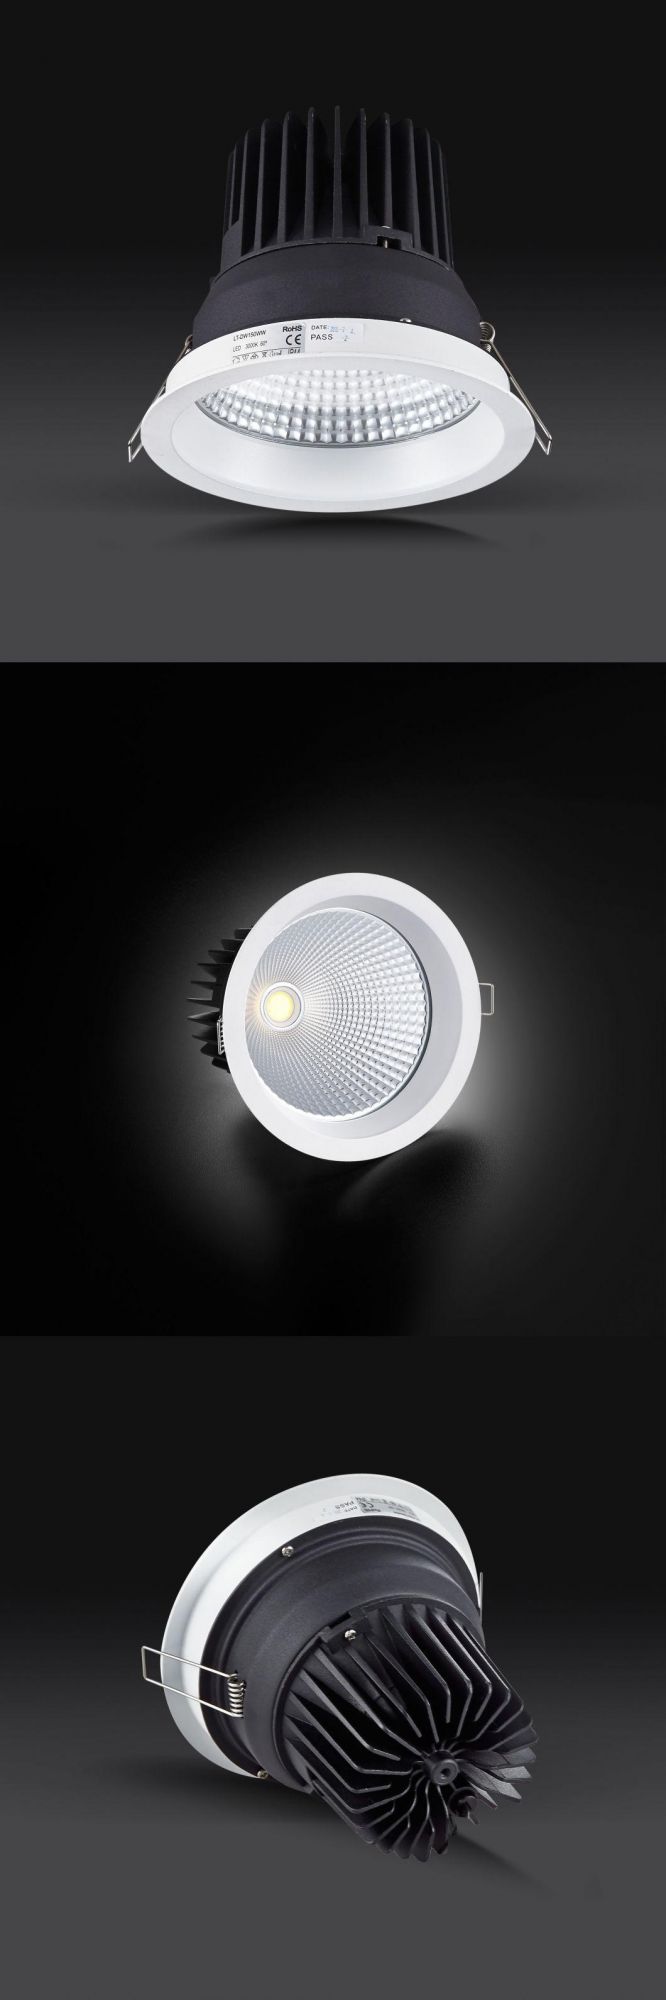 R6202 15W/20W/25W Aluminum Dimmable COB LED Ceiling Spotlight Recessed Downlight with Driver